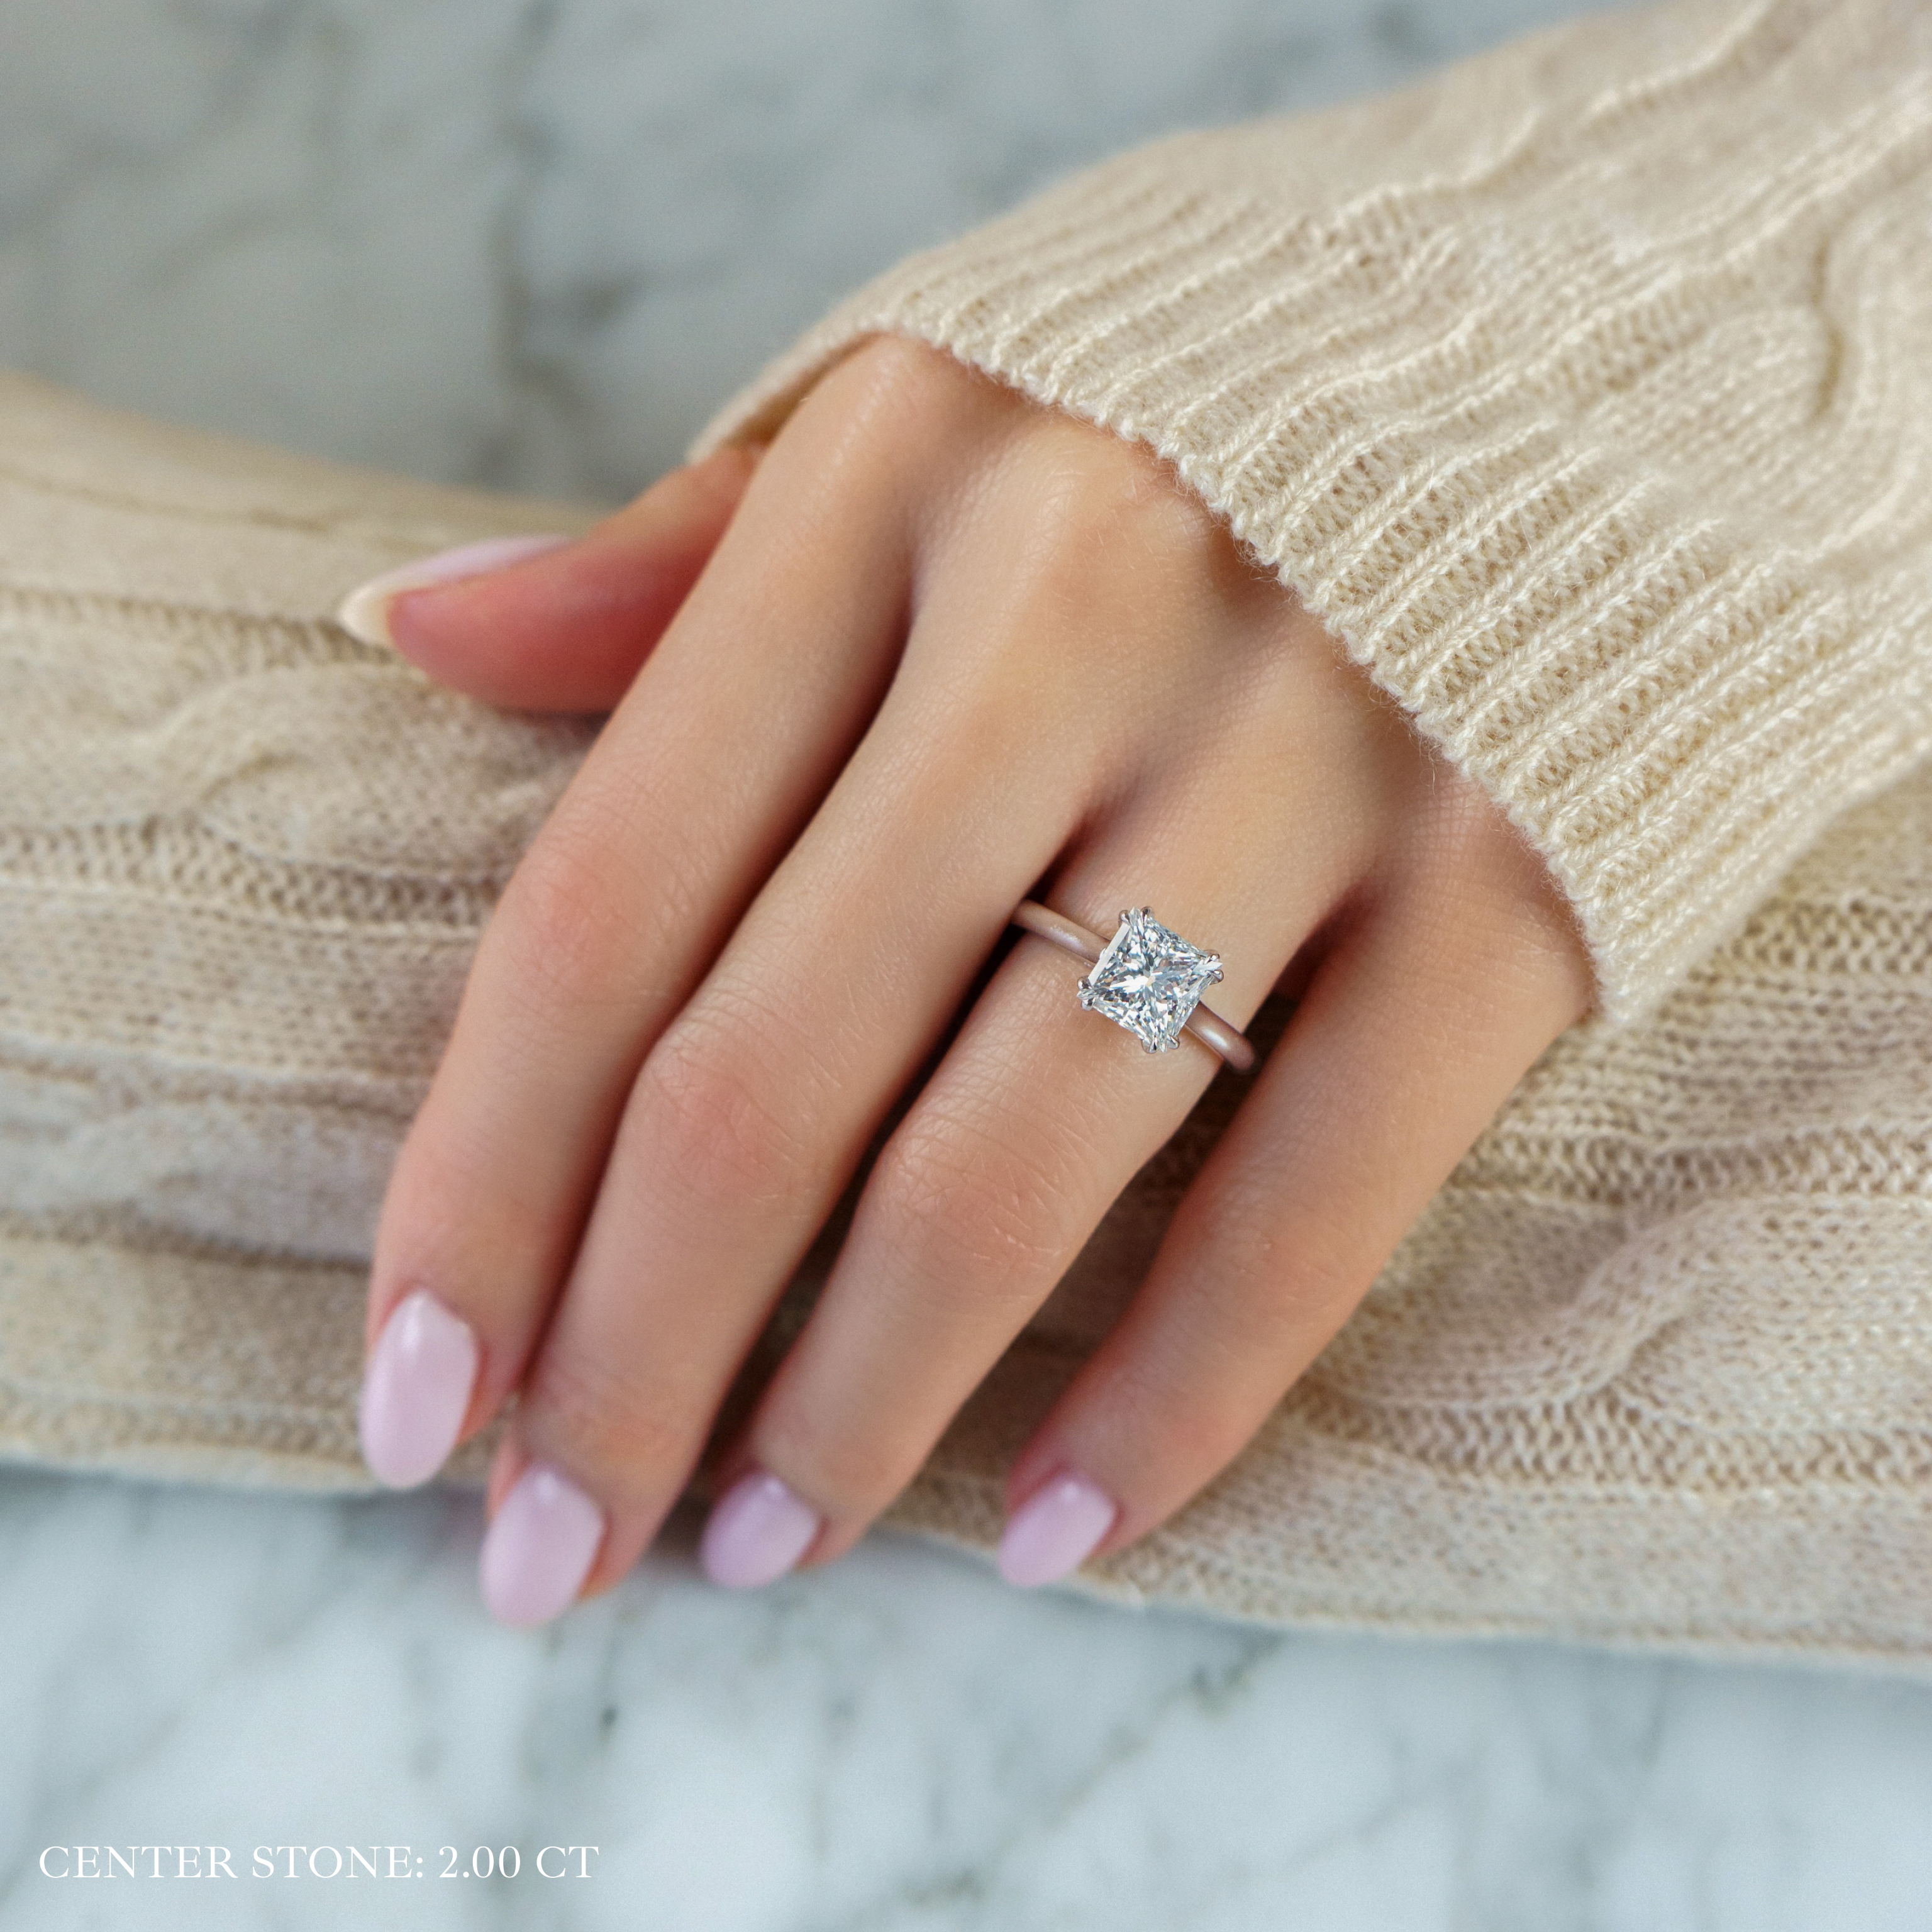 LEO'S PERFECT SOLITAIRE SETTING© princess cut yellow gold